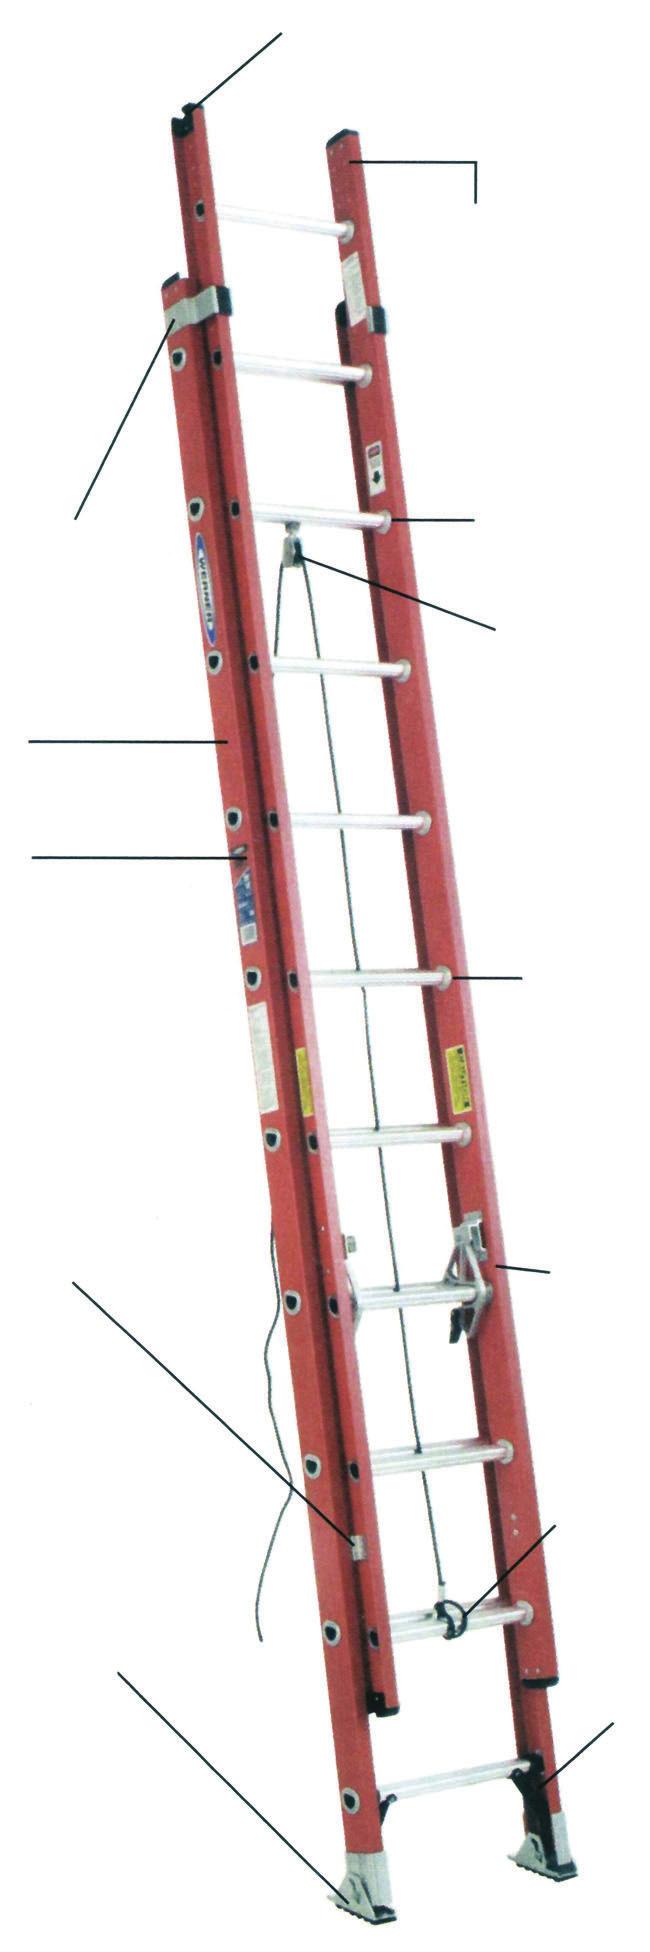 Phone: 800-227-4255 www.hallssafety.com Fax: 724-458-0592 FIBERGLASS D-RUNG EXTENSION LADDER/STRAIGHT LADDER M a r - r e s i s ta n t 300 Lbs. Load Capacity, Type 1A Duty Rating D6216-2* 36.